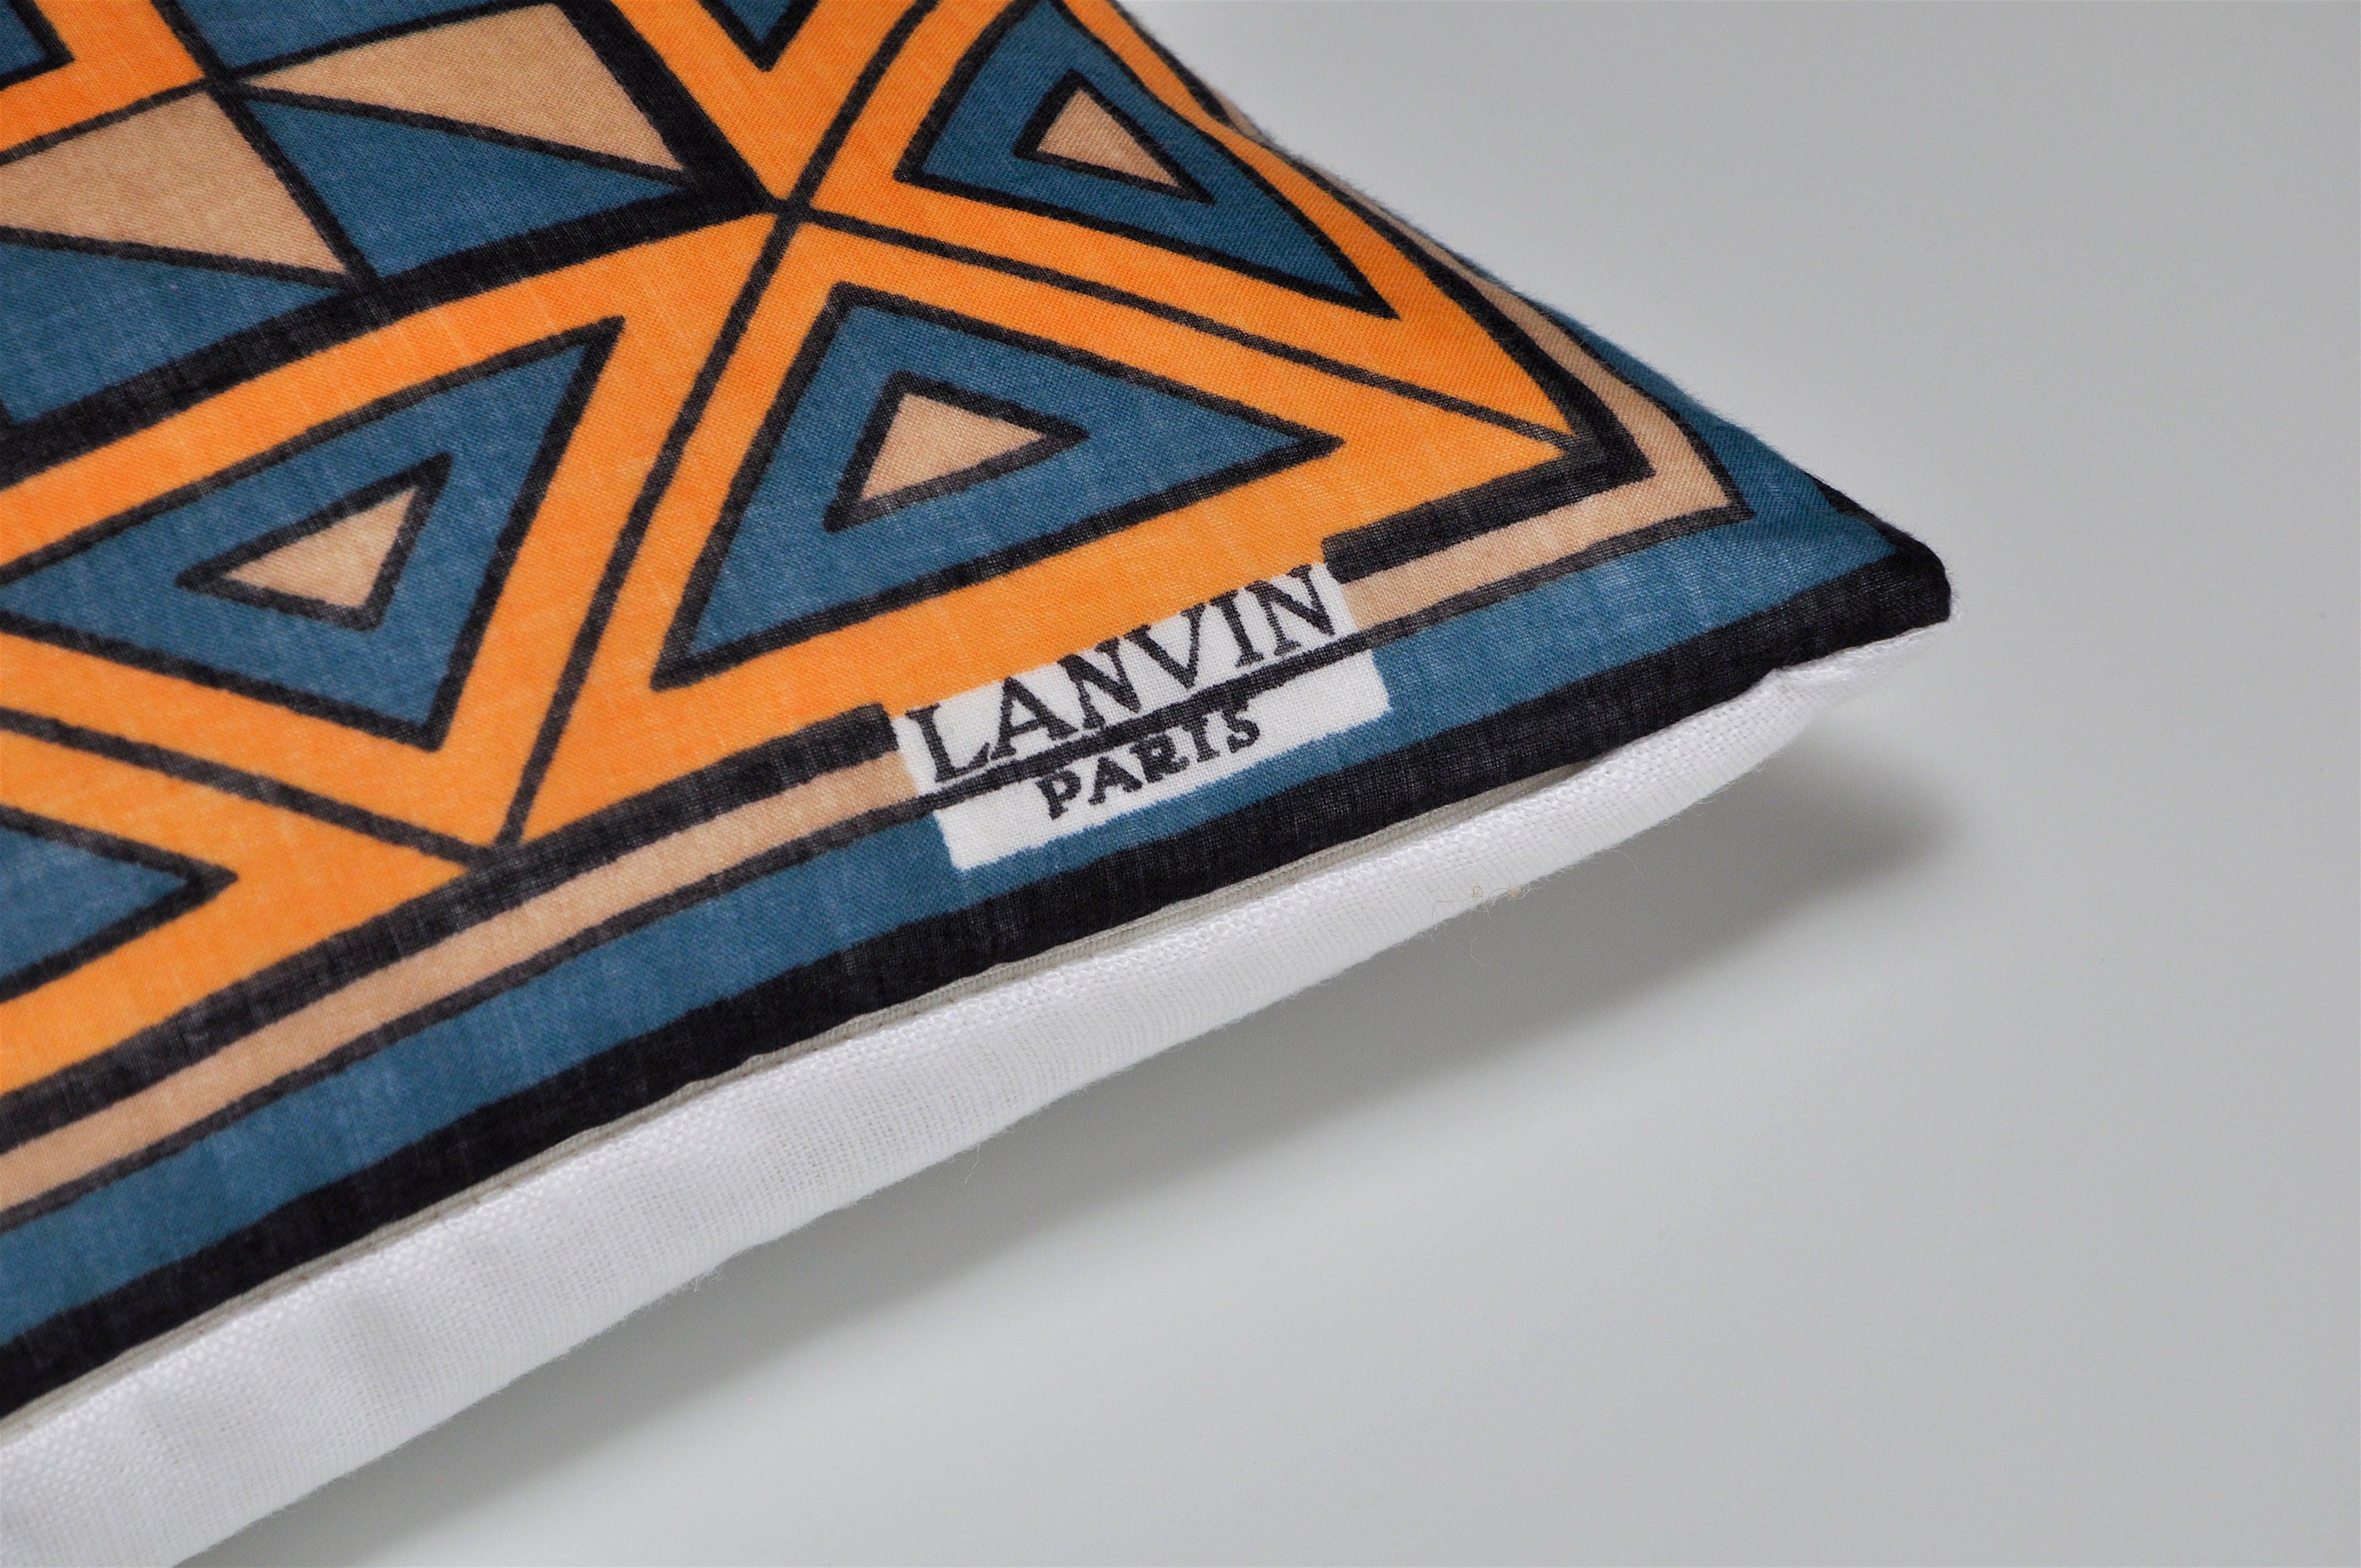 Custom made one-of-a-kind luxury cushion (pillow) created from an exquisite vintage Lanvin fashion scarf in an orange and blue geometric pattern. An extremely unique find from a Parisian antiques market and a very unusual example of a piece by